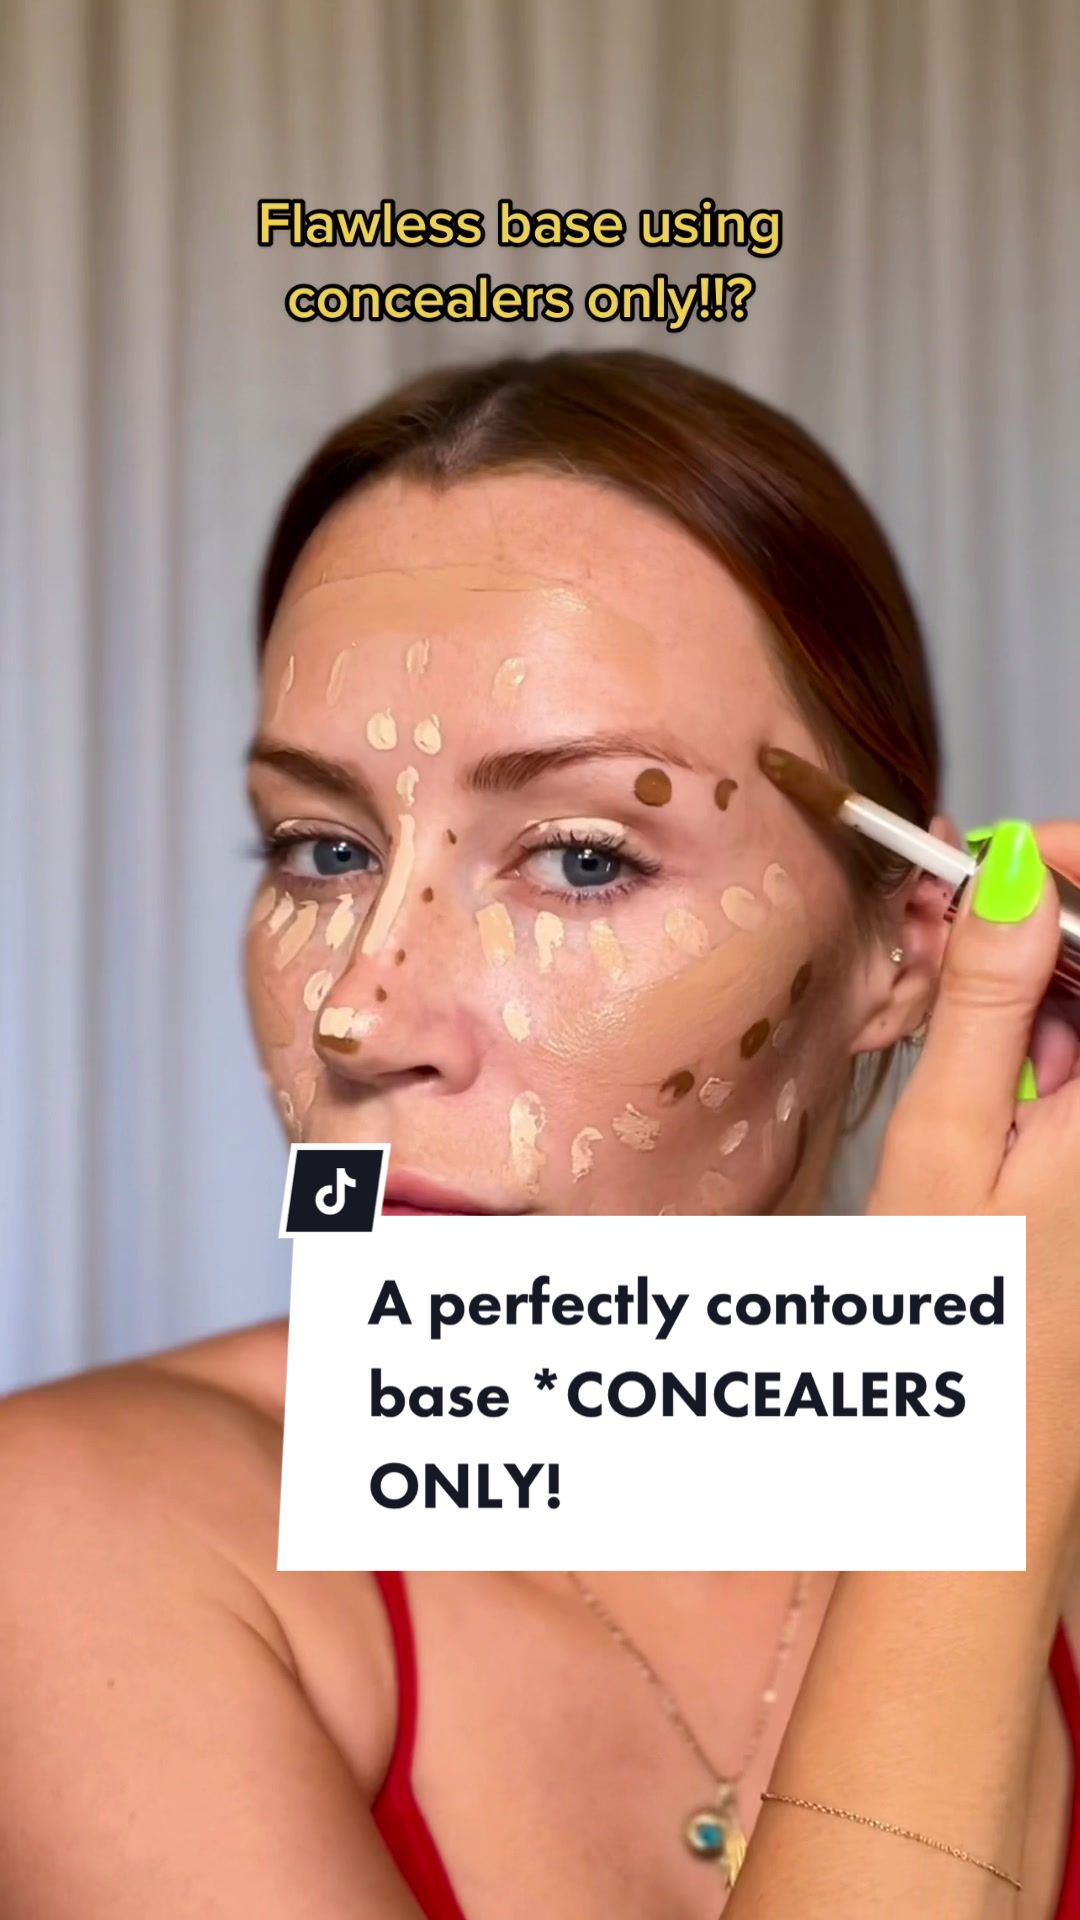 @Flawless base using concealers only!??? ad Here I’ve used th...